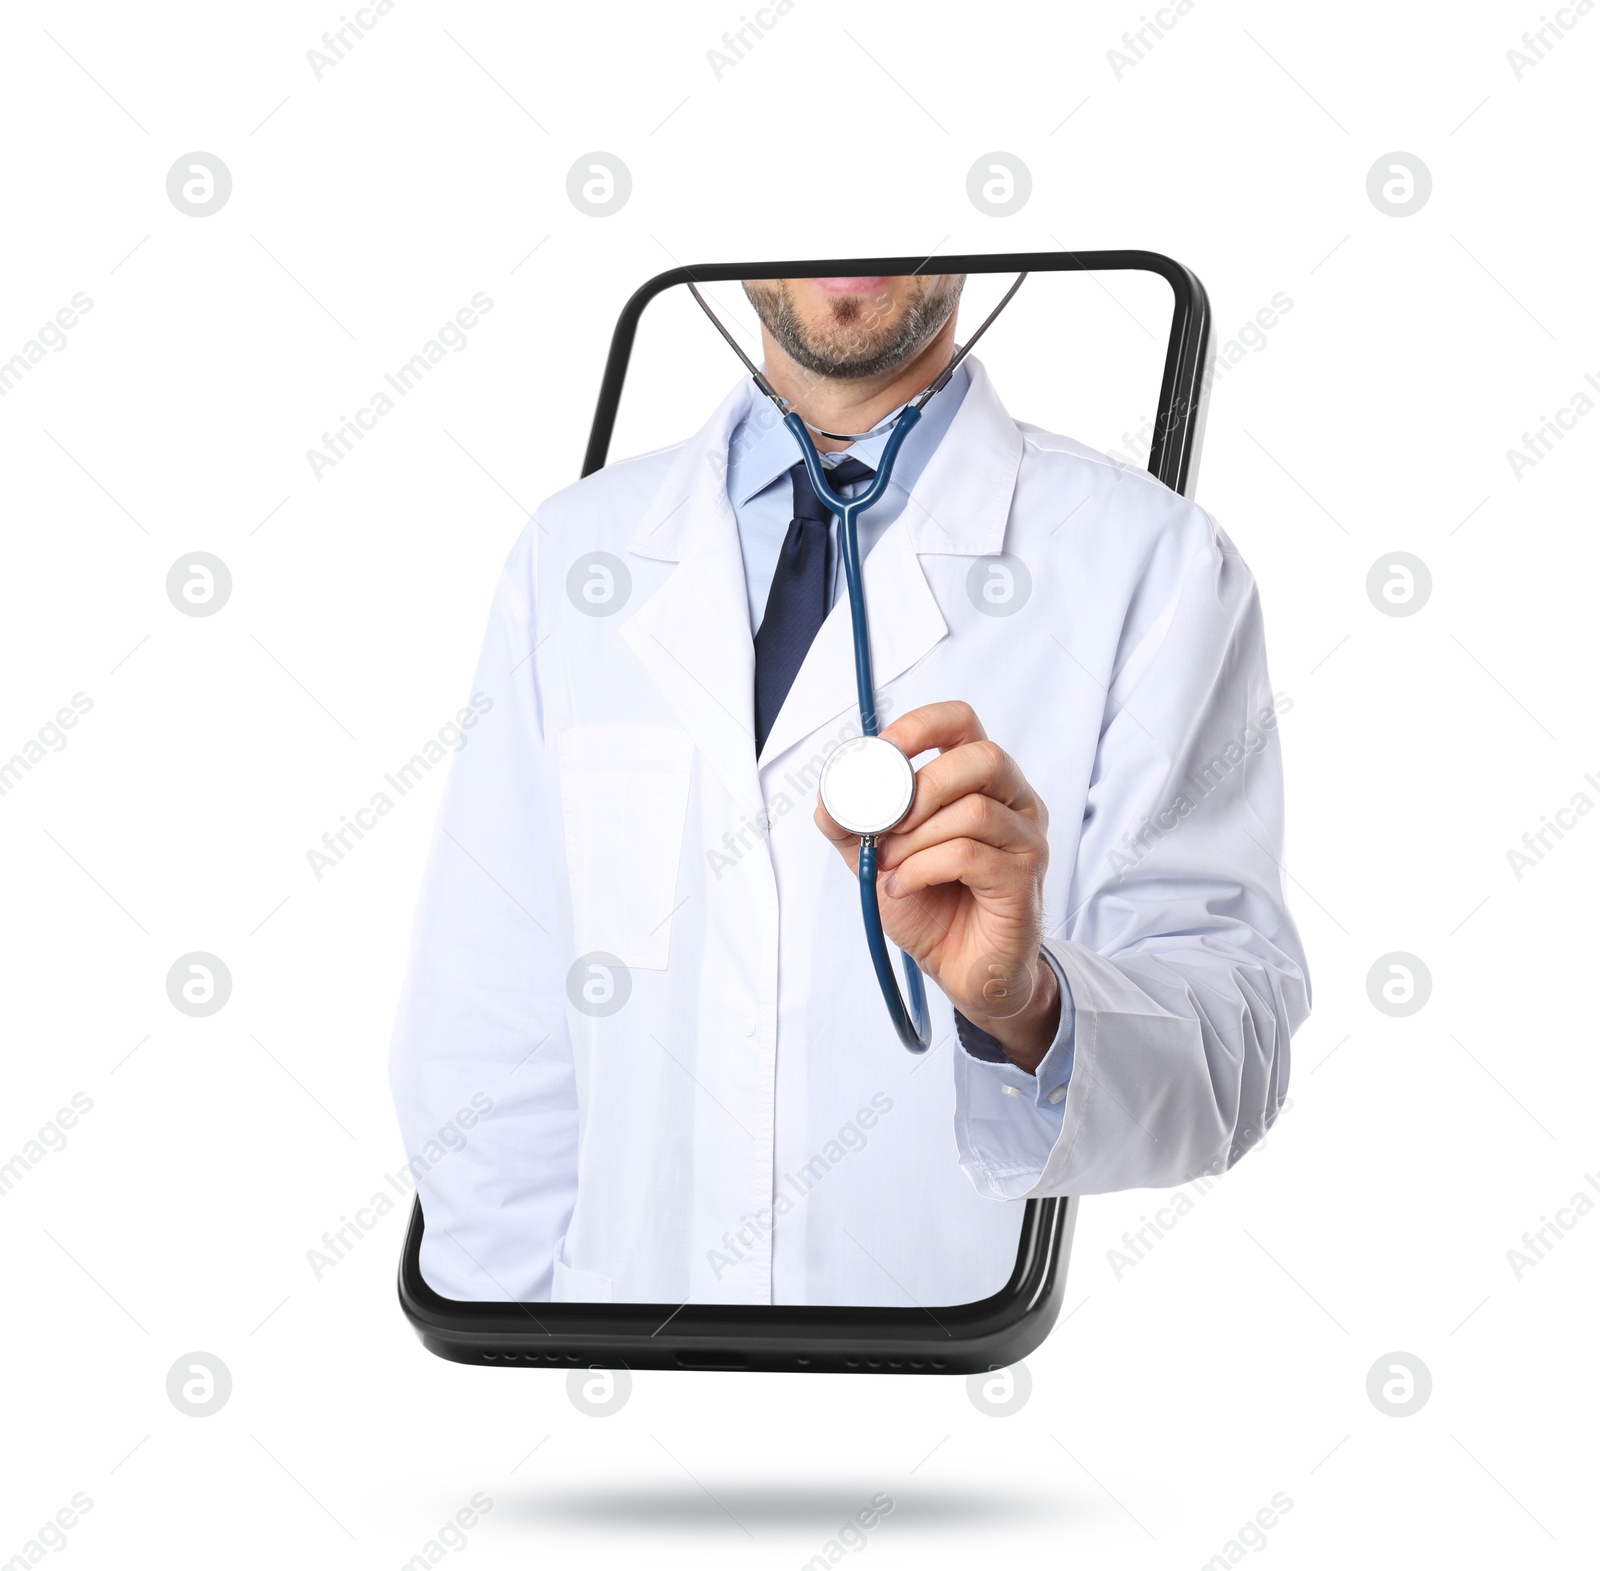 Image of Online medical consultation. Doctor with stethoscope on smartphone screen against white background